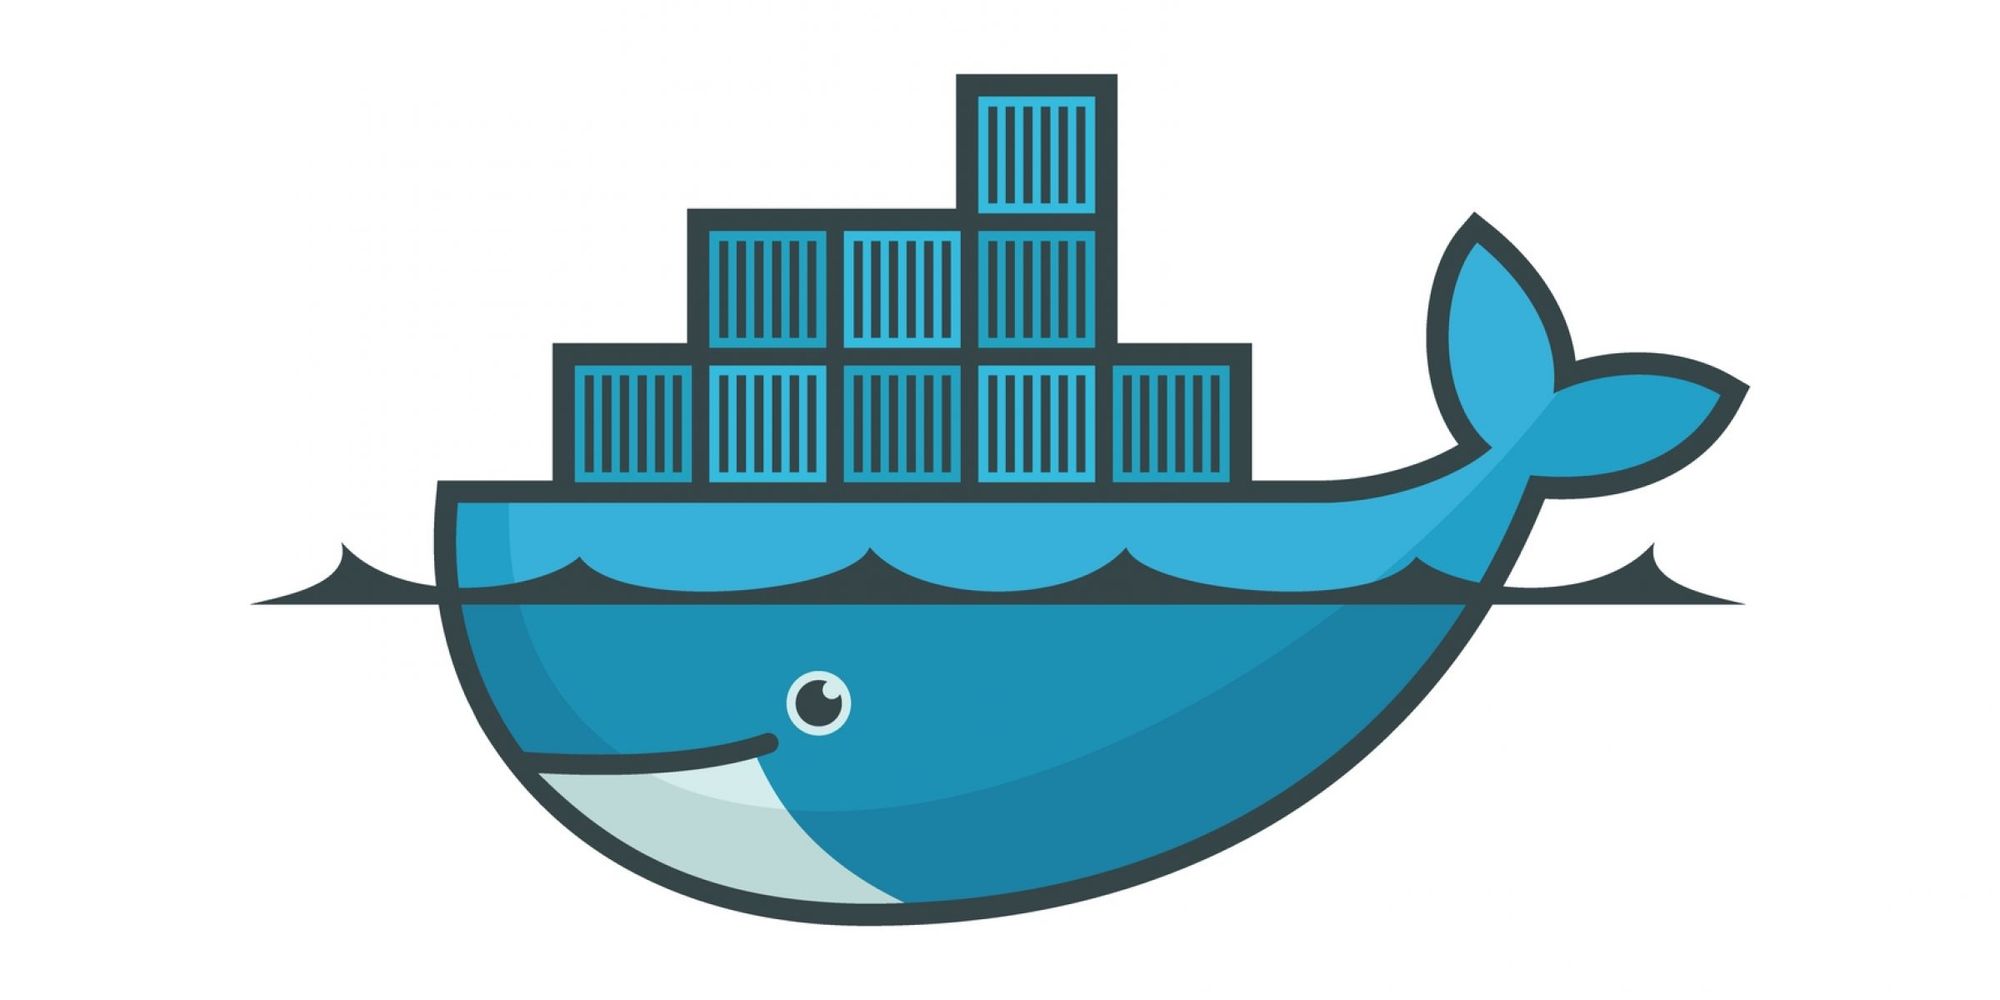 Docker Stats with Containers Names